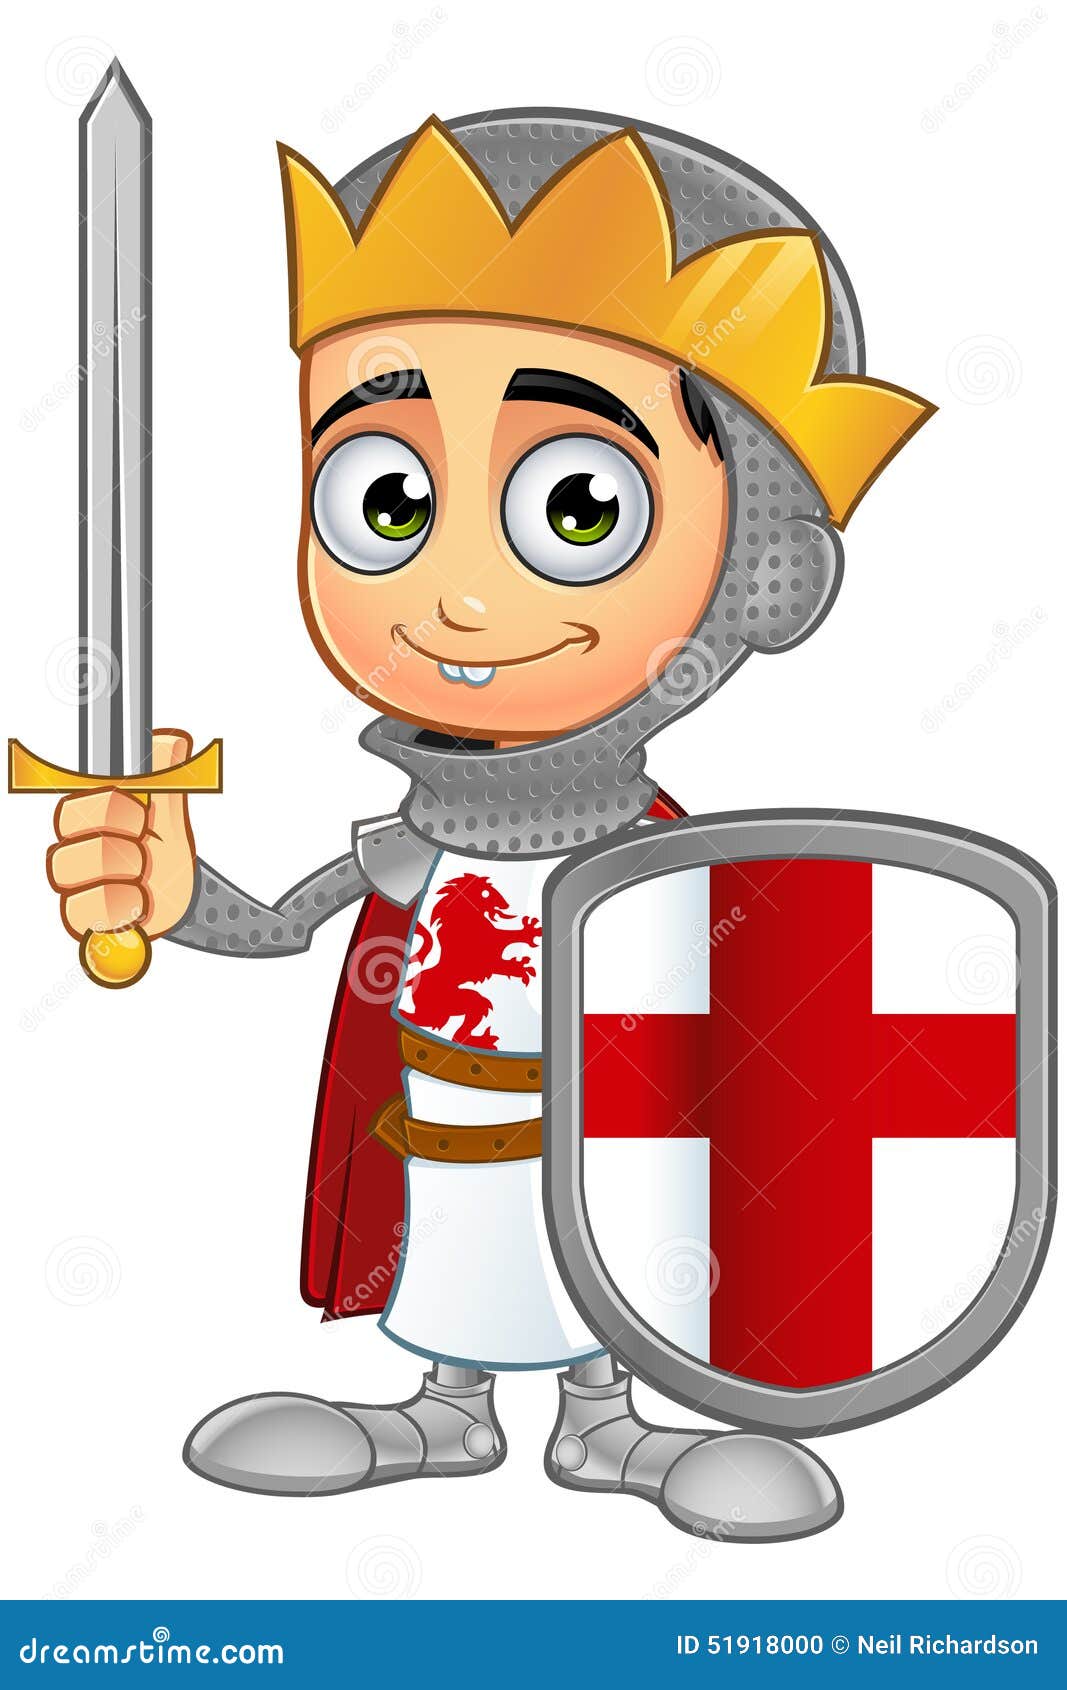 Download St. George Boy King Character Stock Vector - Illustration of england, dragon: 51918000